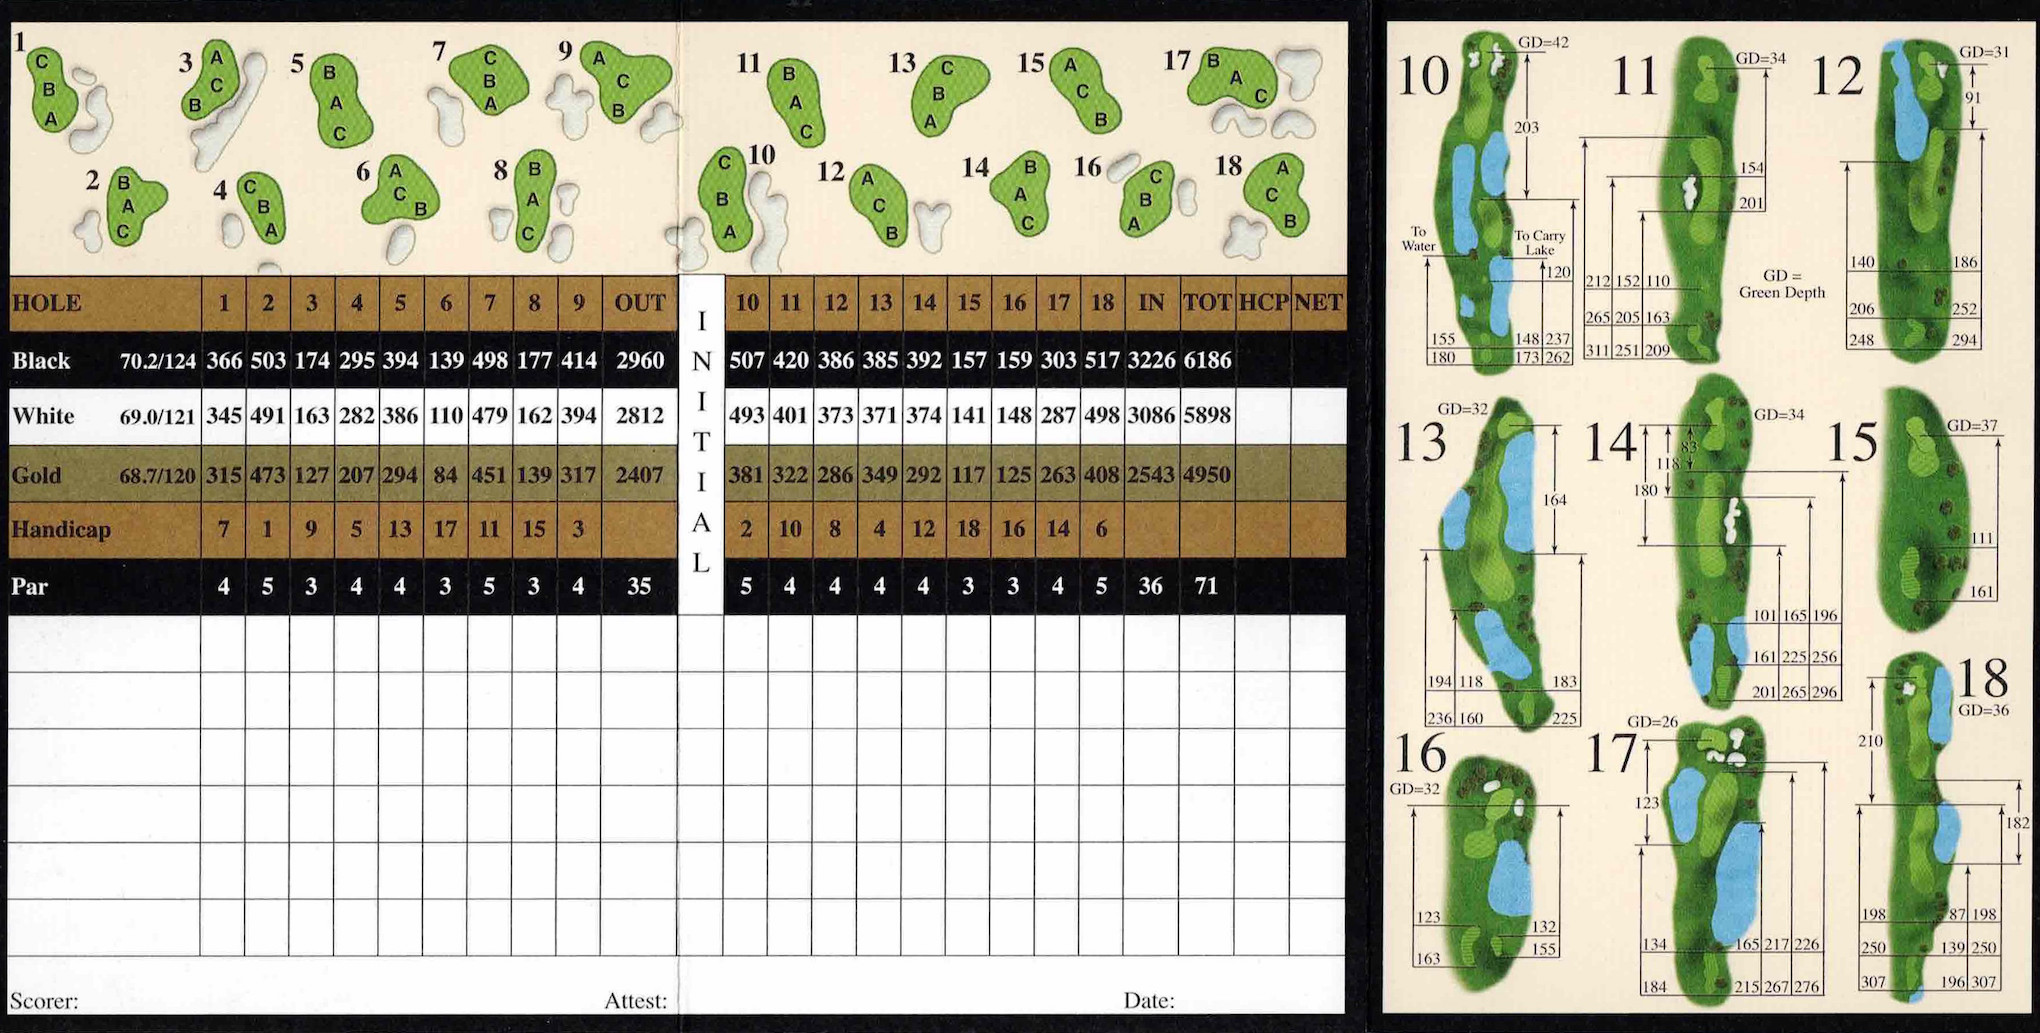 Scan of the scorecard from Glendale Lakes Golf Club in Glendale Heights, Illinois. 